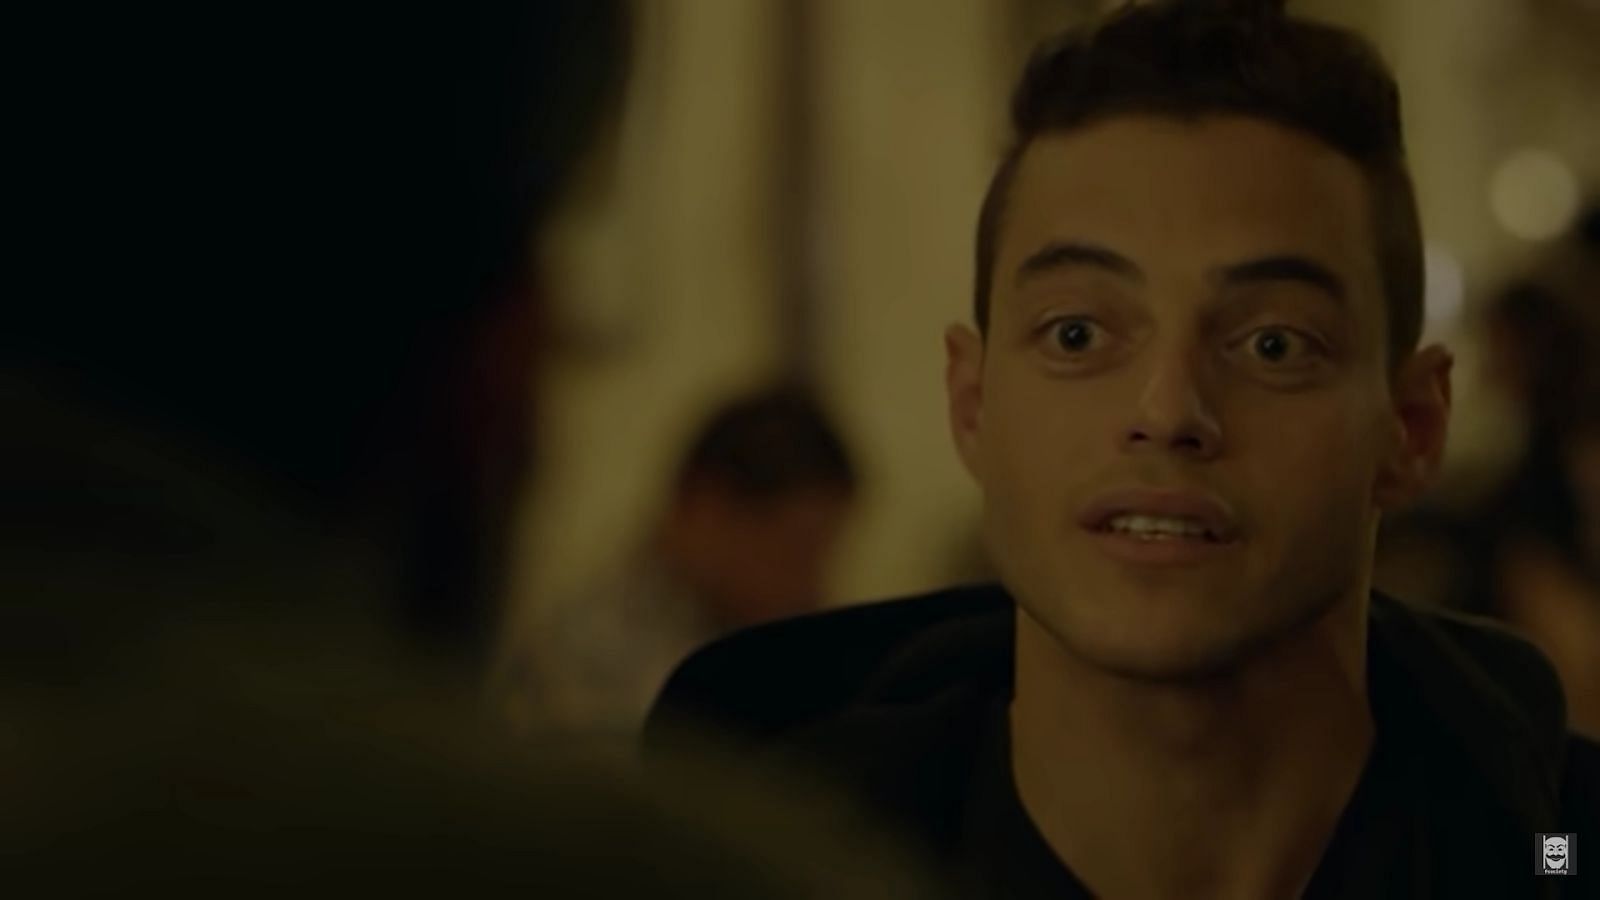 What is Rami Malek known for?